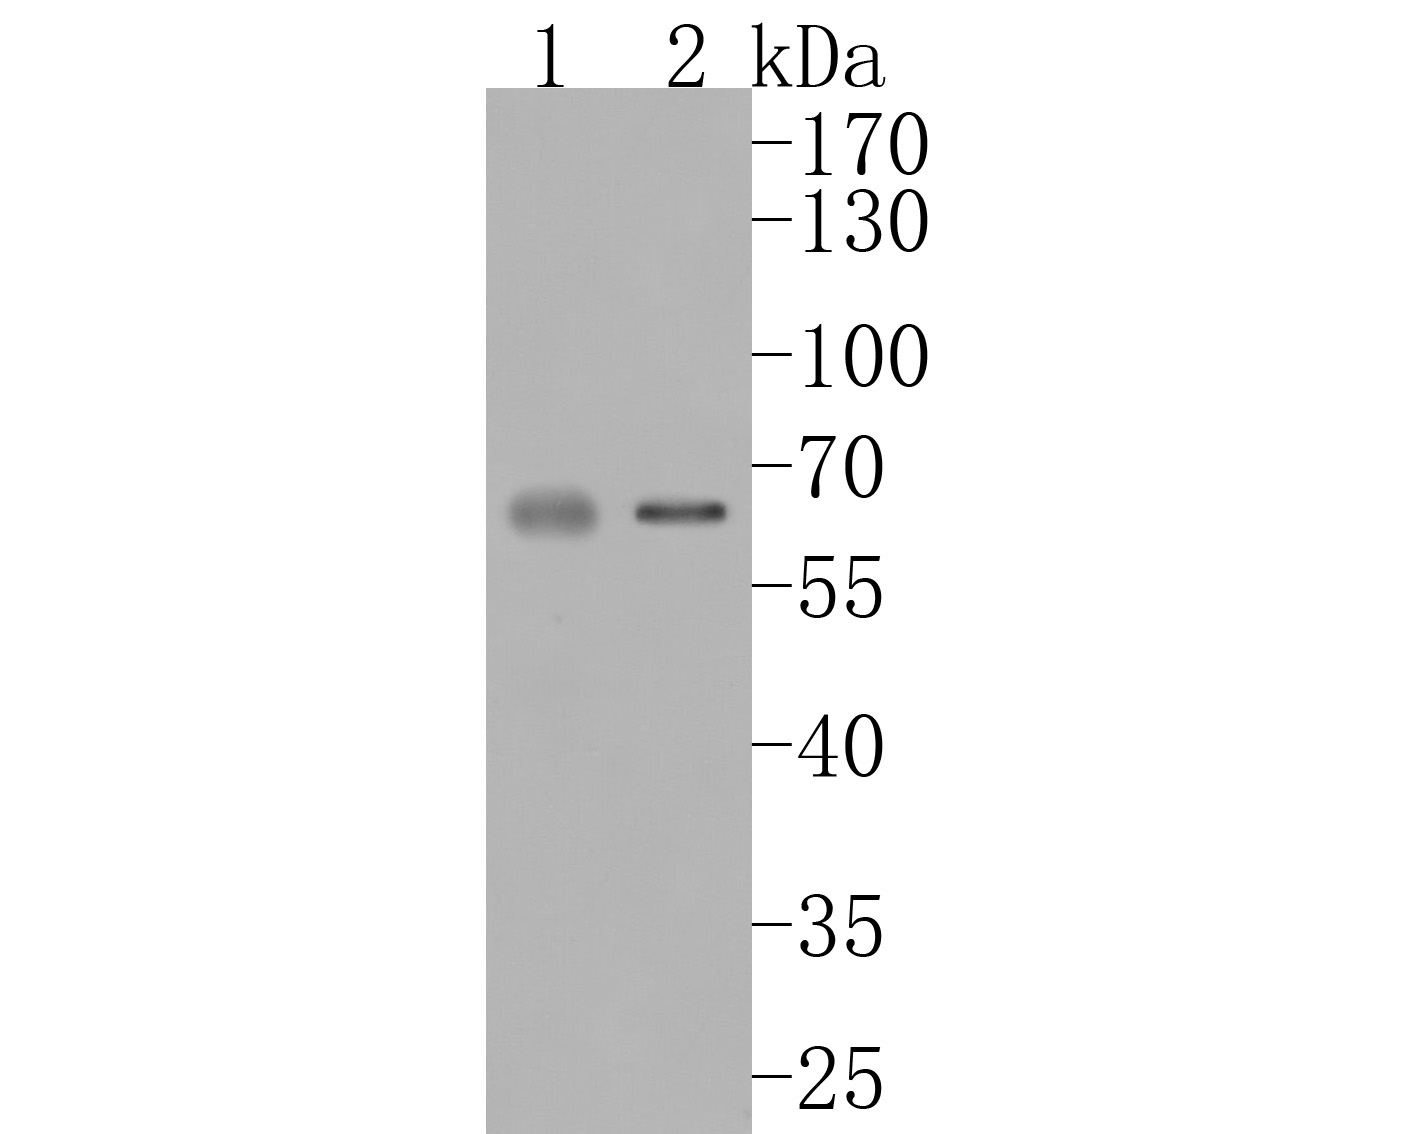 Western blot analysis of Sulfite oxidase on different lysates. Proteins were transferred to a PVDF membrane and blocked with 5% BSA in PBS for 1 hour at room temperature. The primary antibody (HA720008, 1/500) was used in 5% BSA at room temperature for 2 hours. Goat Anti-Rabbit IgG - HRP Secondary Antibody (HA1001) at 1:5,000 dilution was used for 1 hour at room temperature.<br />
Positive control: <br />
Lane 1: Human kidney tissue lysate<br />
Lane 2: B16F1 cell lysate